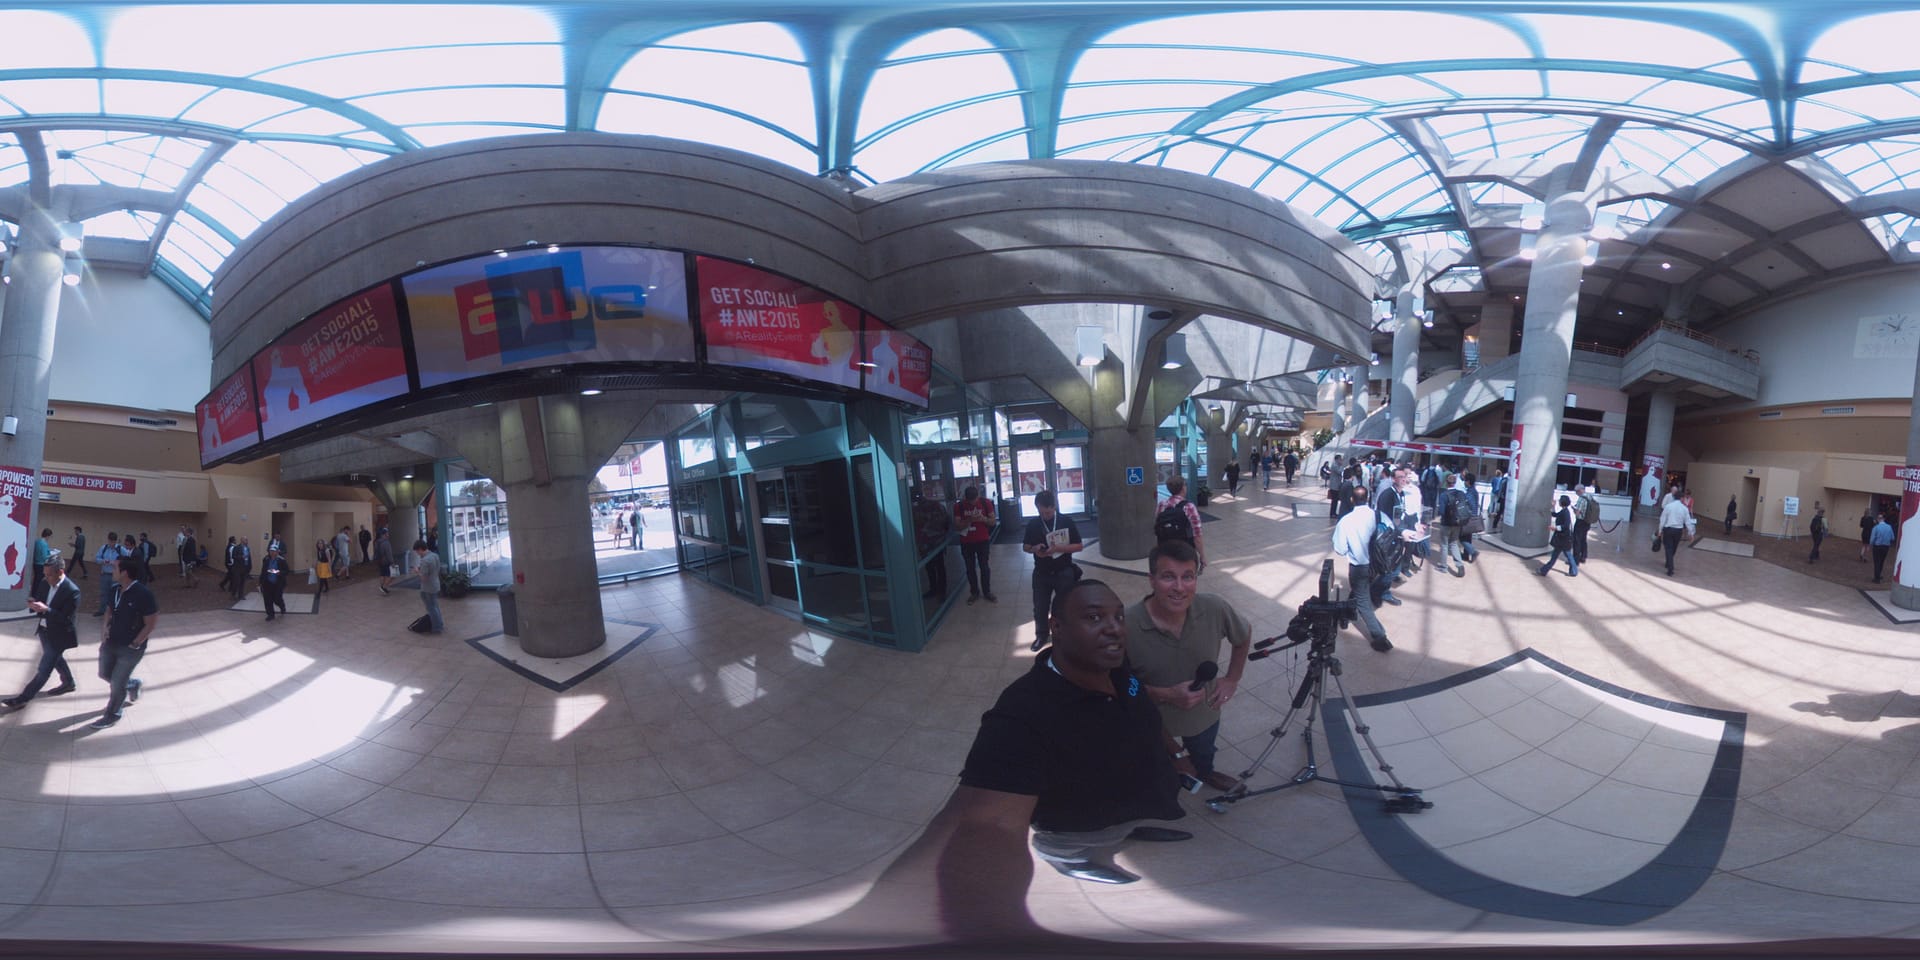 A 360 degree view of the Augmented World Expo 2015 courtesy of Bubl and its Bublcam.